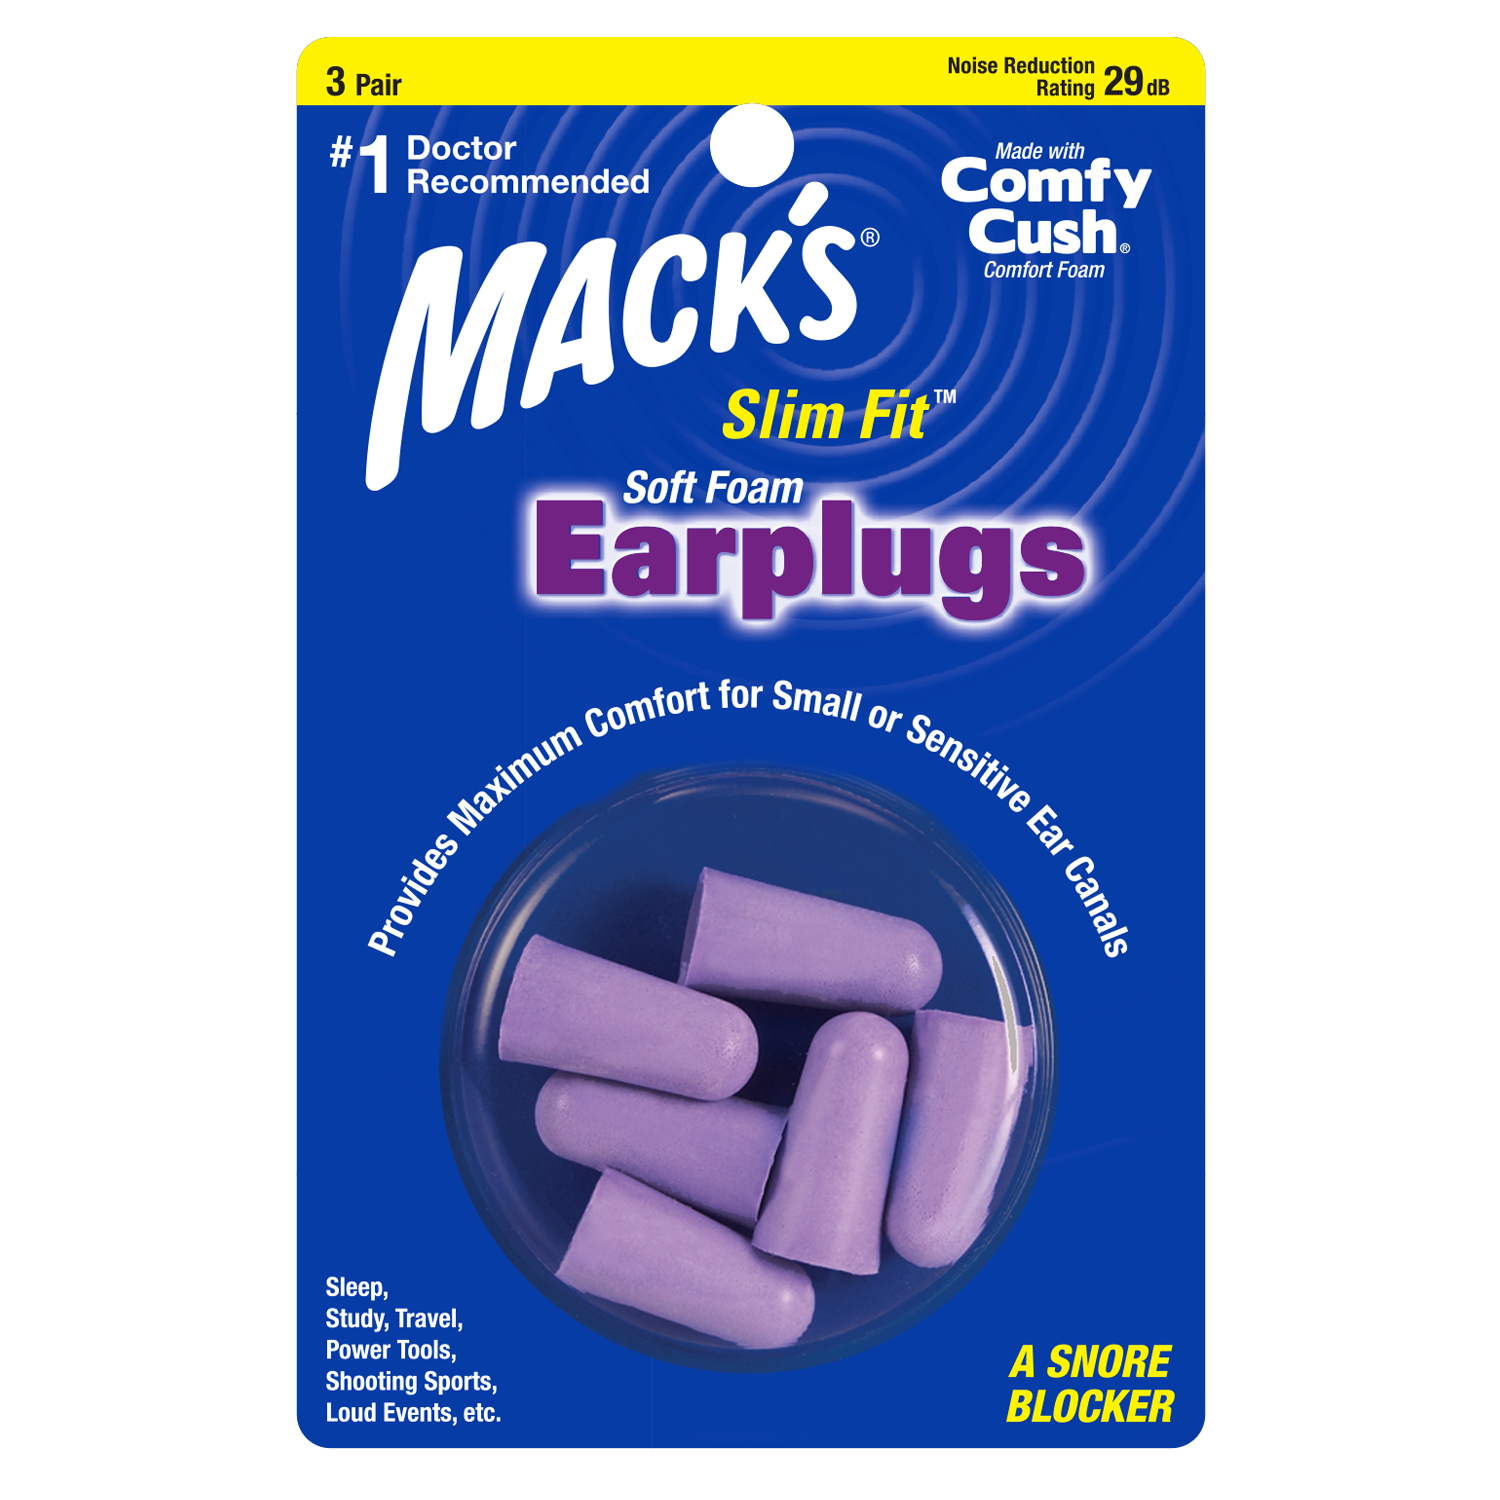 macks earplugs slim fit soft foam ear plugs for sleeping and small ear canals to help block out noise are best ear plugs for noise cancelling and best purple ear plugs for sleeping